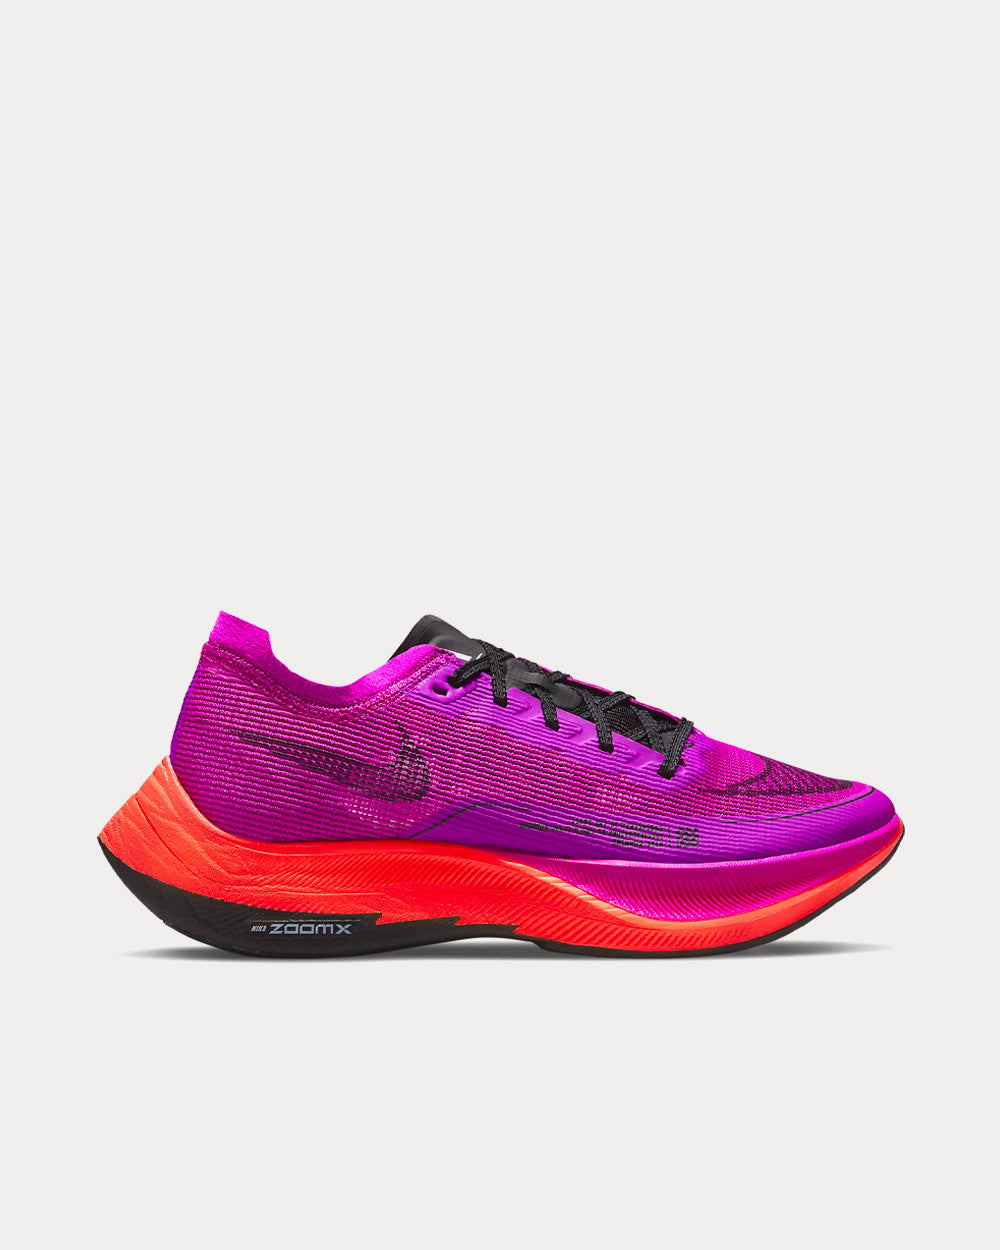 Nike ZoomX Vaporfly Next% 2 Hyper Violet / Flash Crimson / Football Grey /  Black Running Shoes - Sneak in Peace